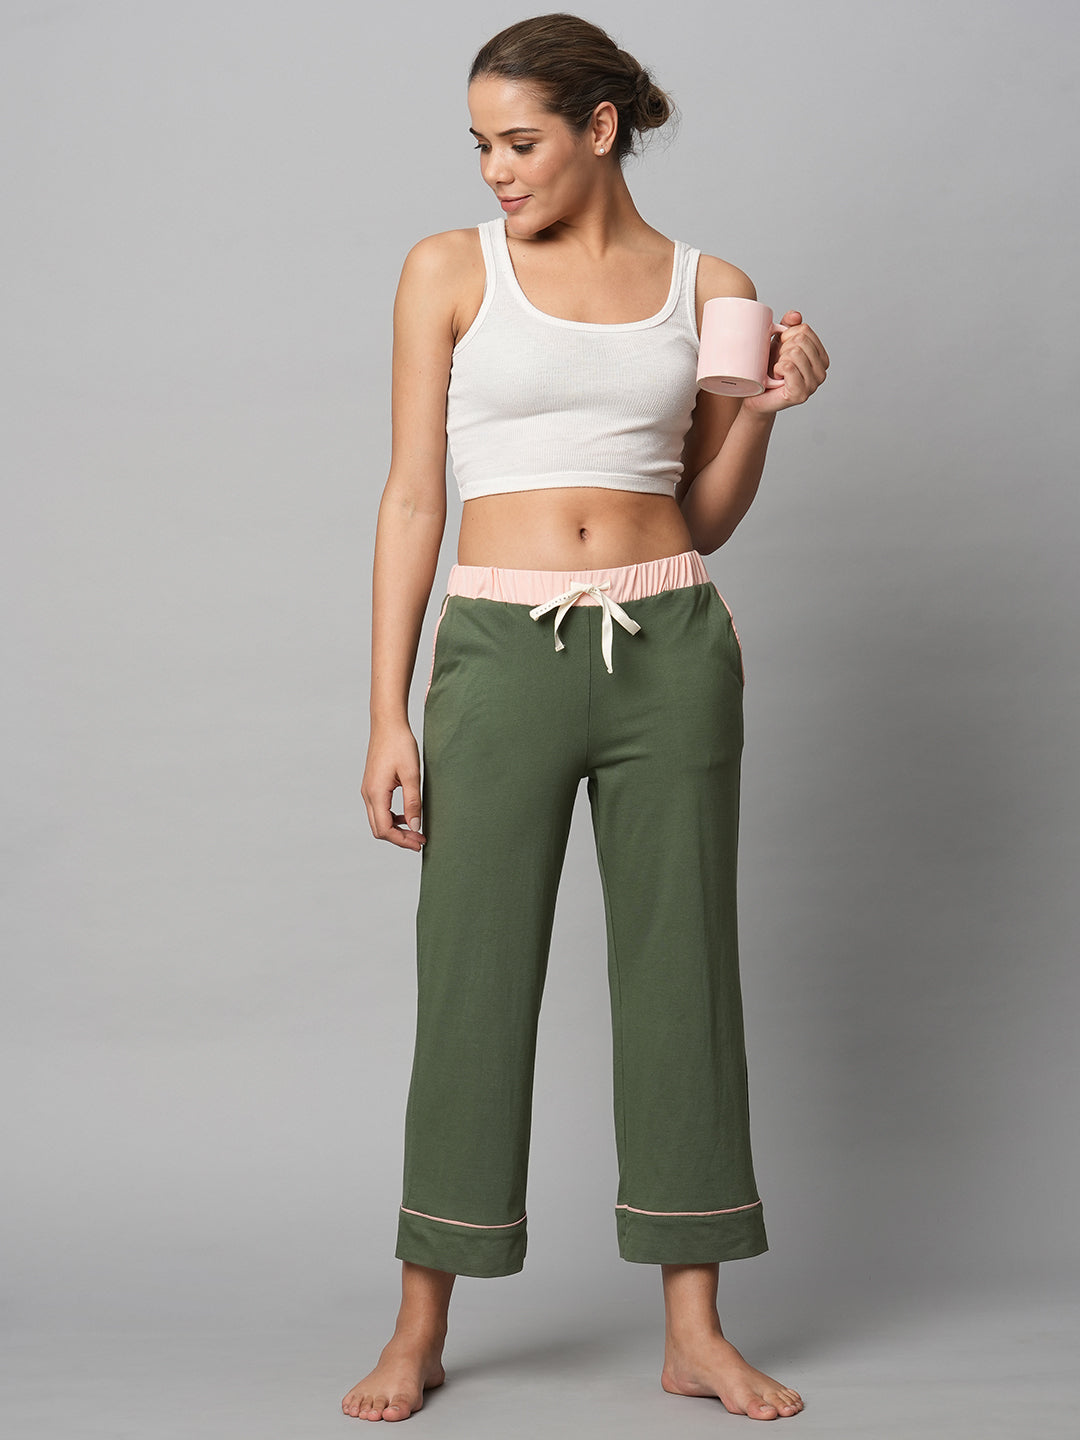 Solid Cotton Jersey Cropped Lounge Pj's